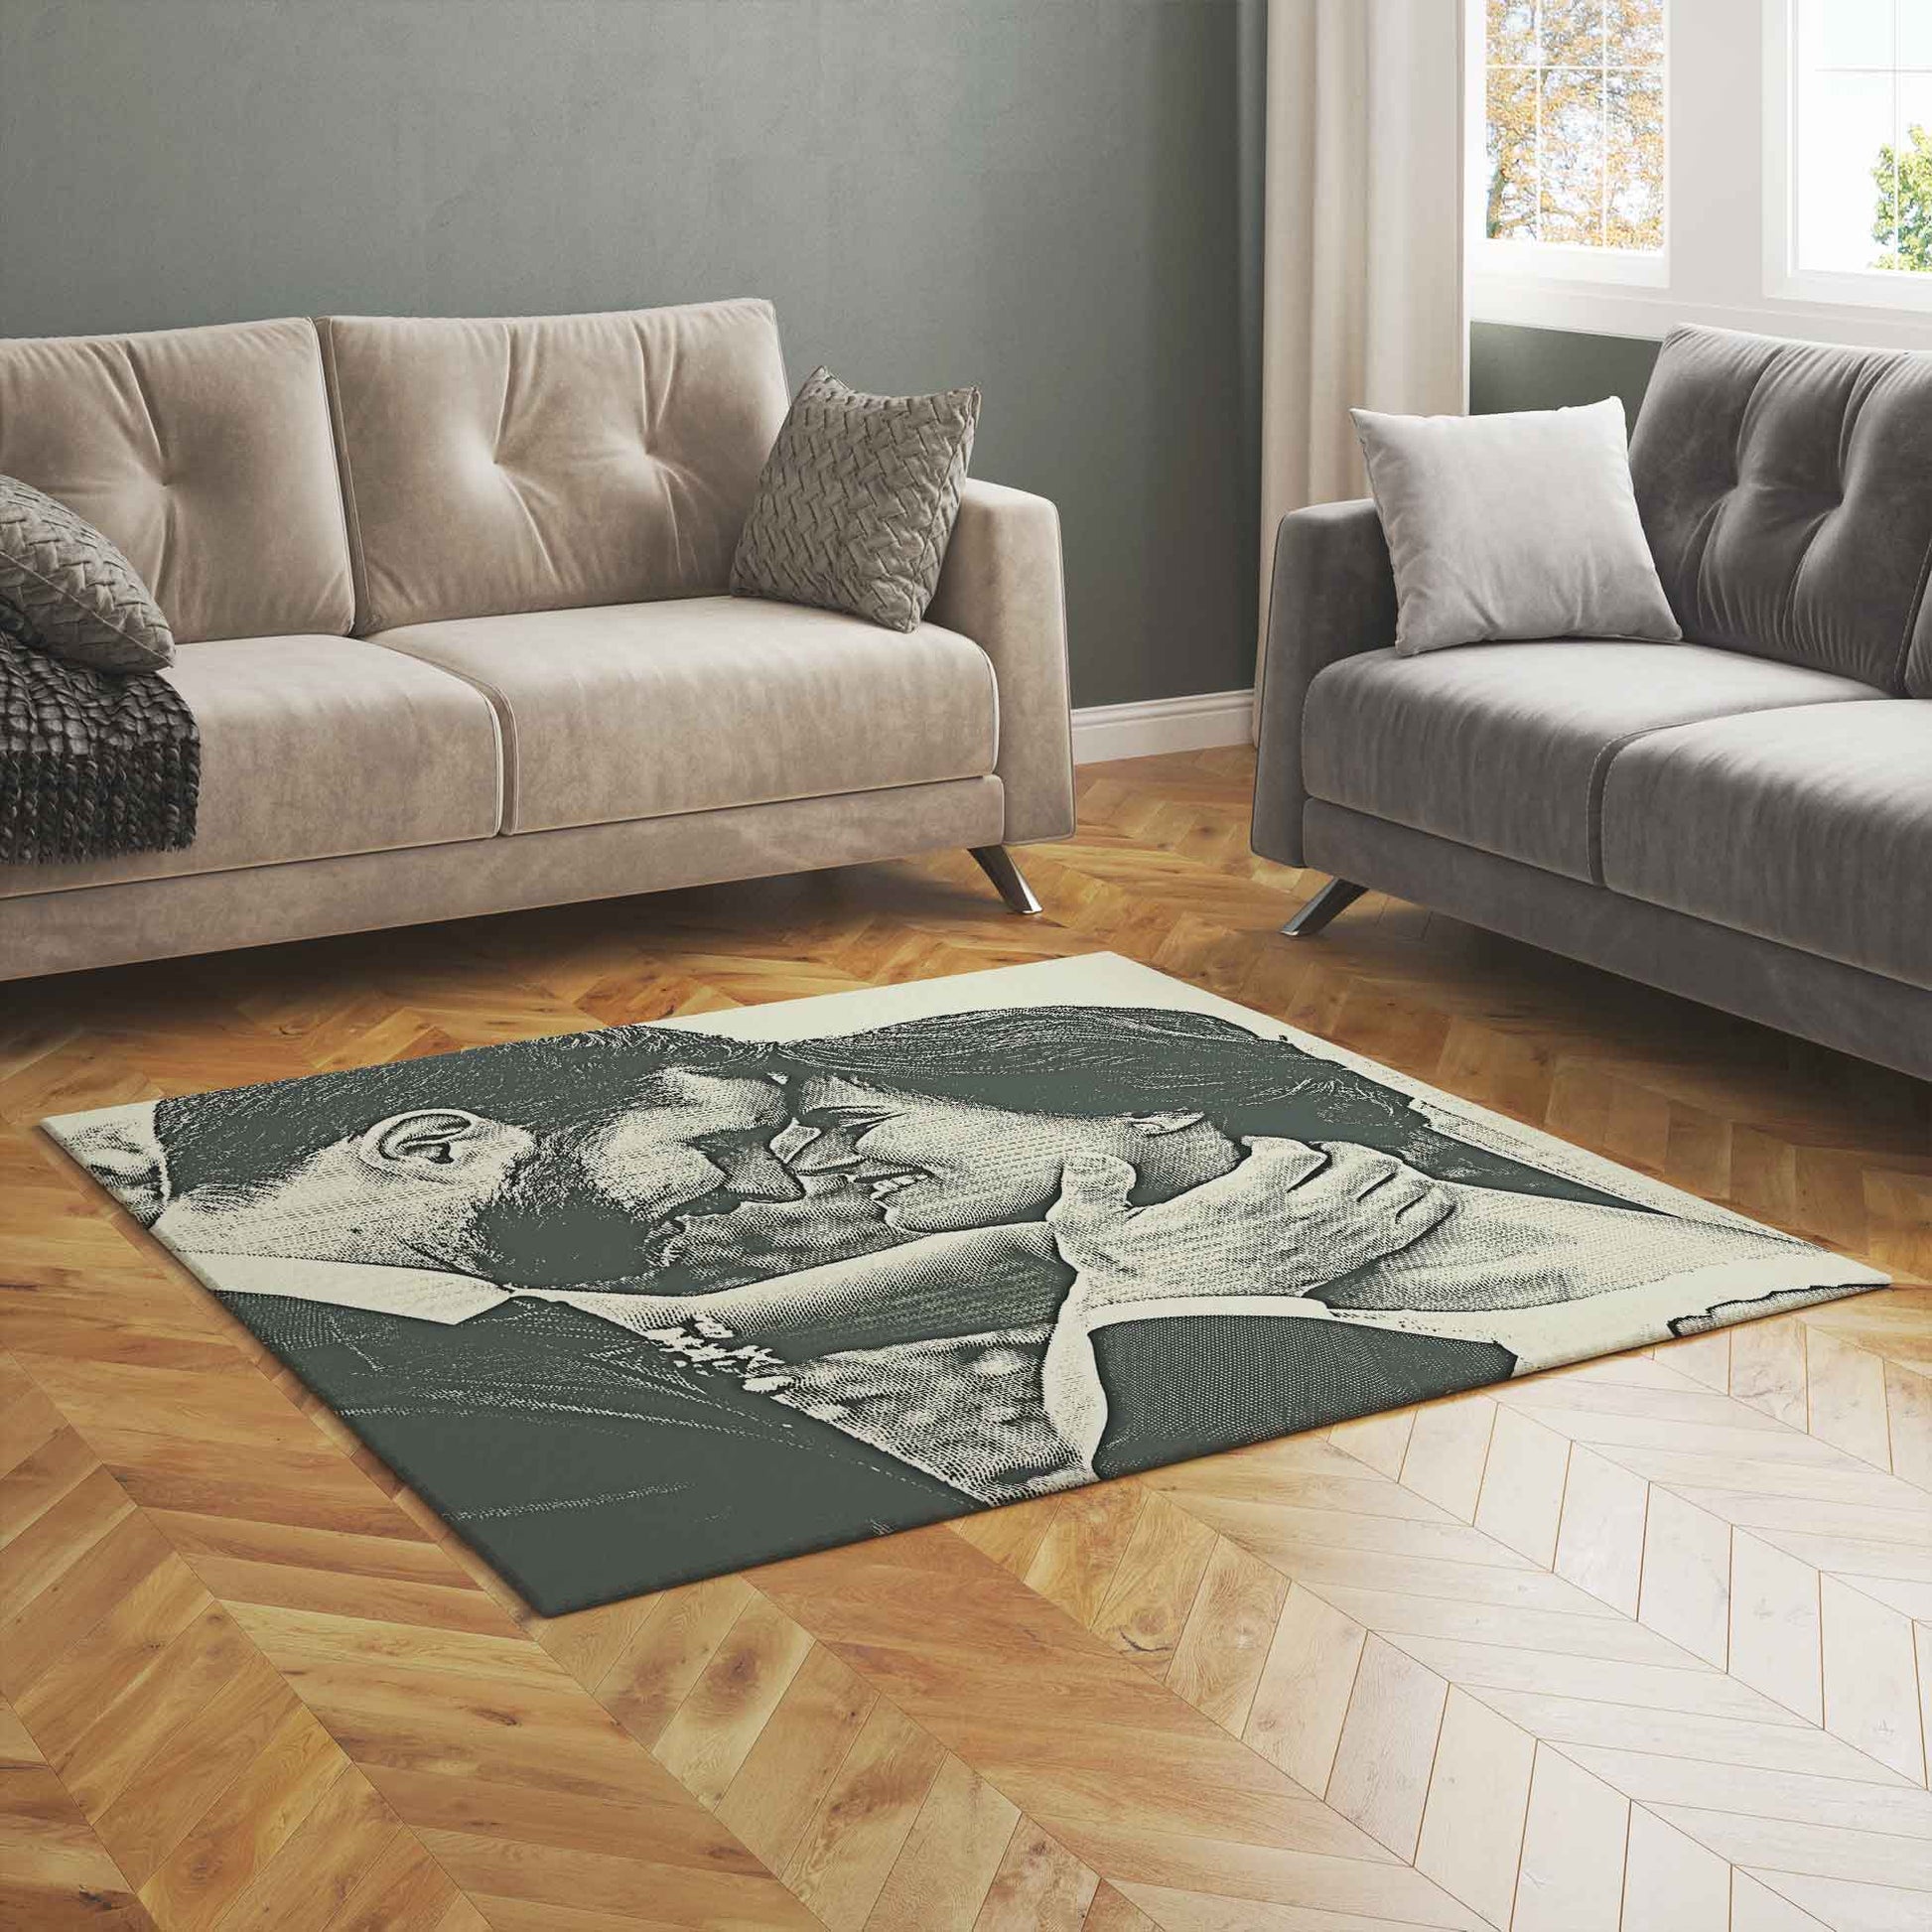 Wrap your loved ones in luxury with our Personalised Money Engraved Photo Rug. Each rug tells a story of wealth and affection